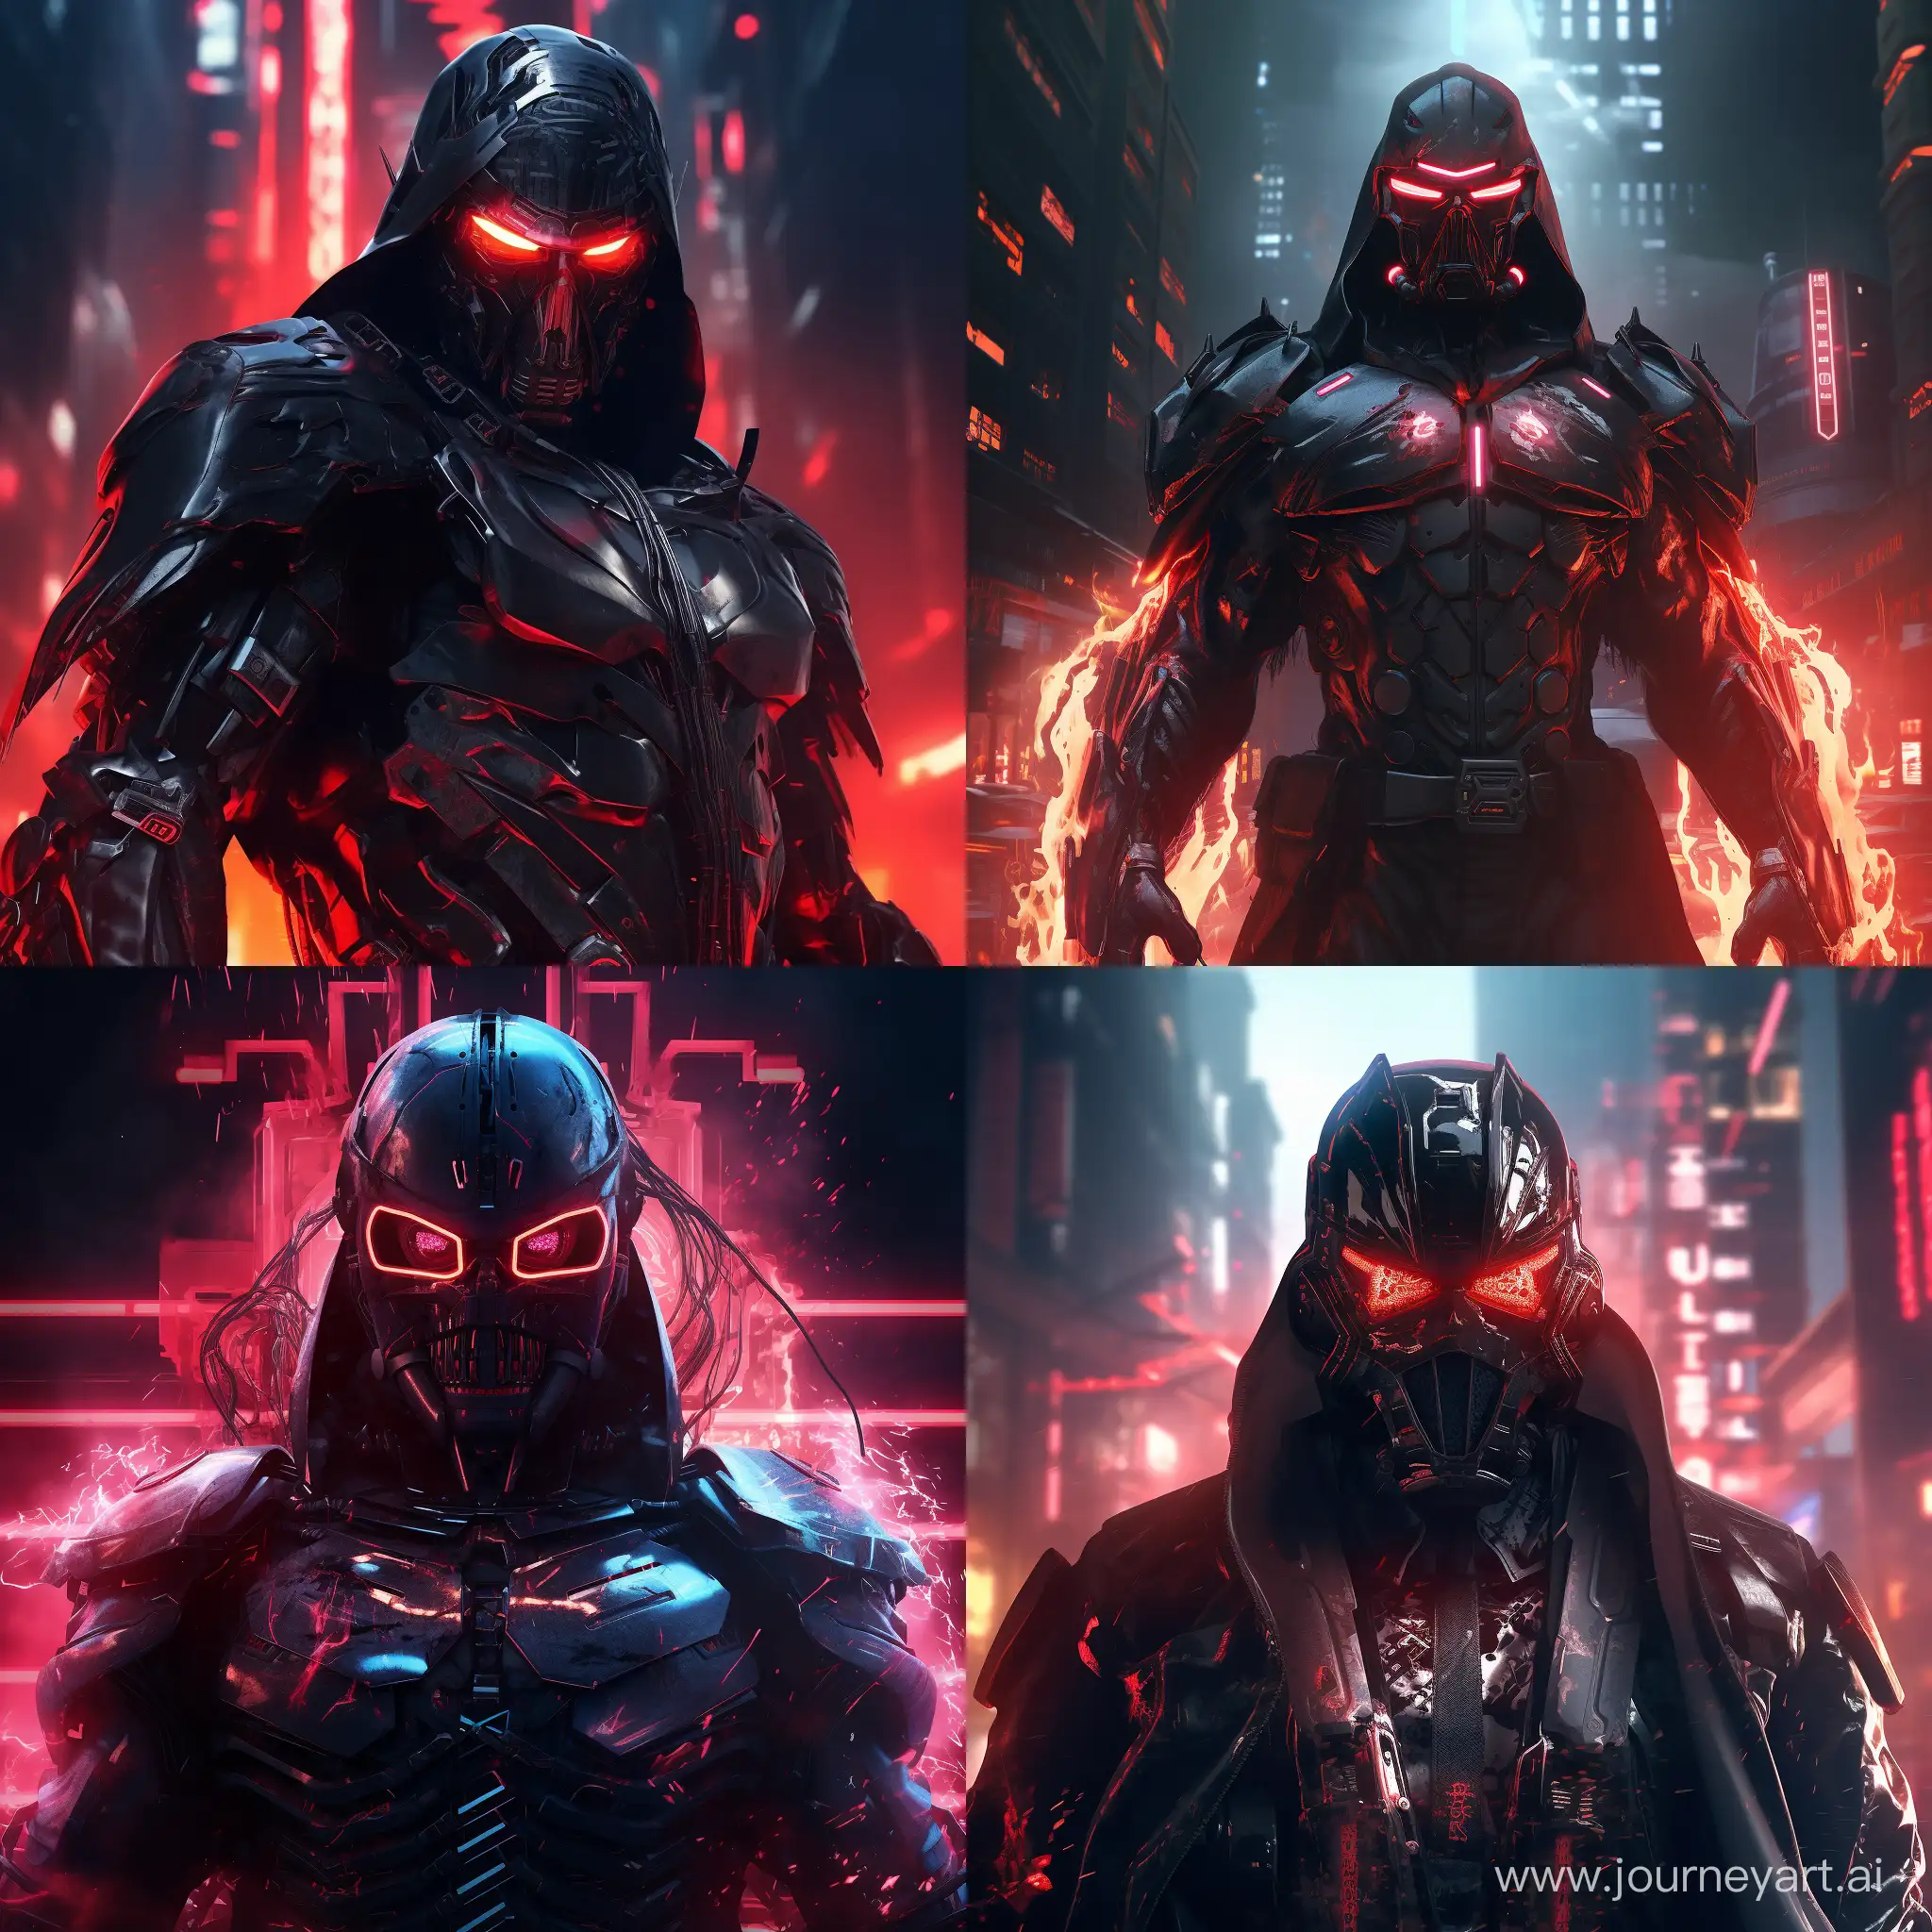 Darth-Vader-Cyberpunk-Art-with-Realism-and-Atmospheric-Lighting